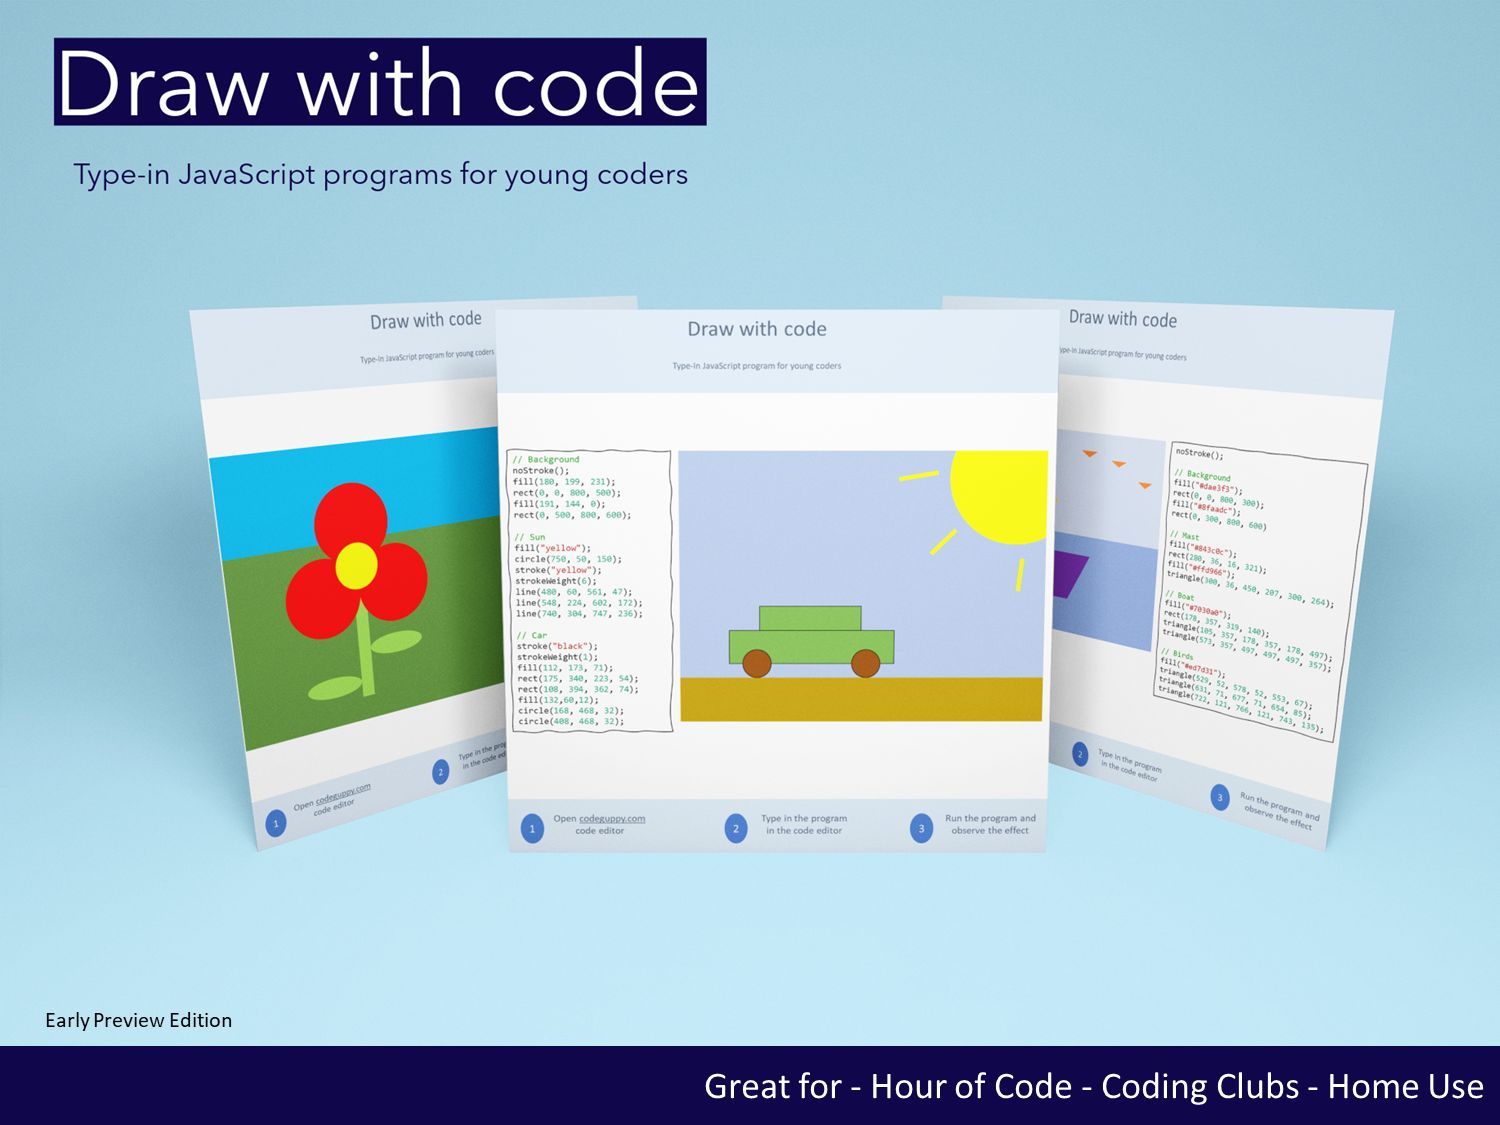 featured image - Use Type-in Programs to Teach Kids to Code